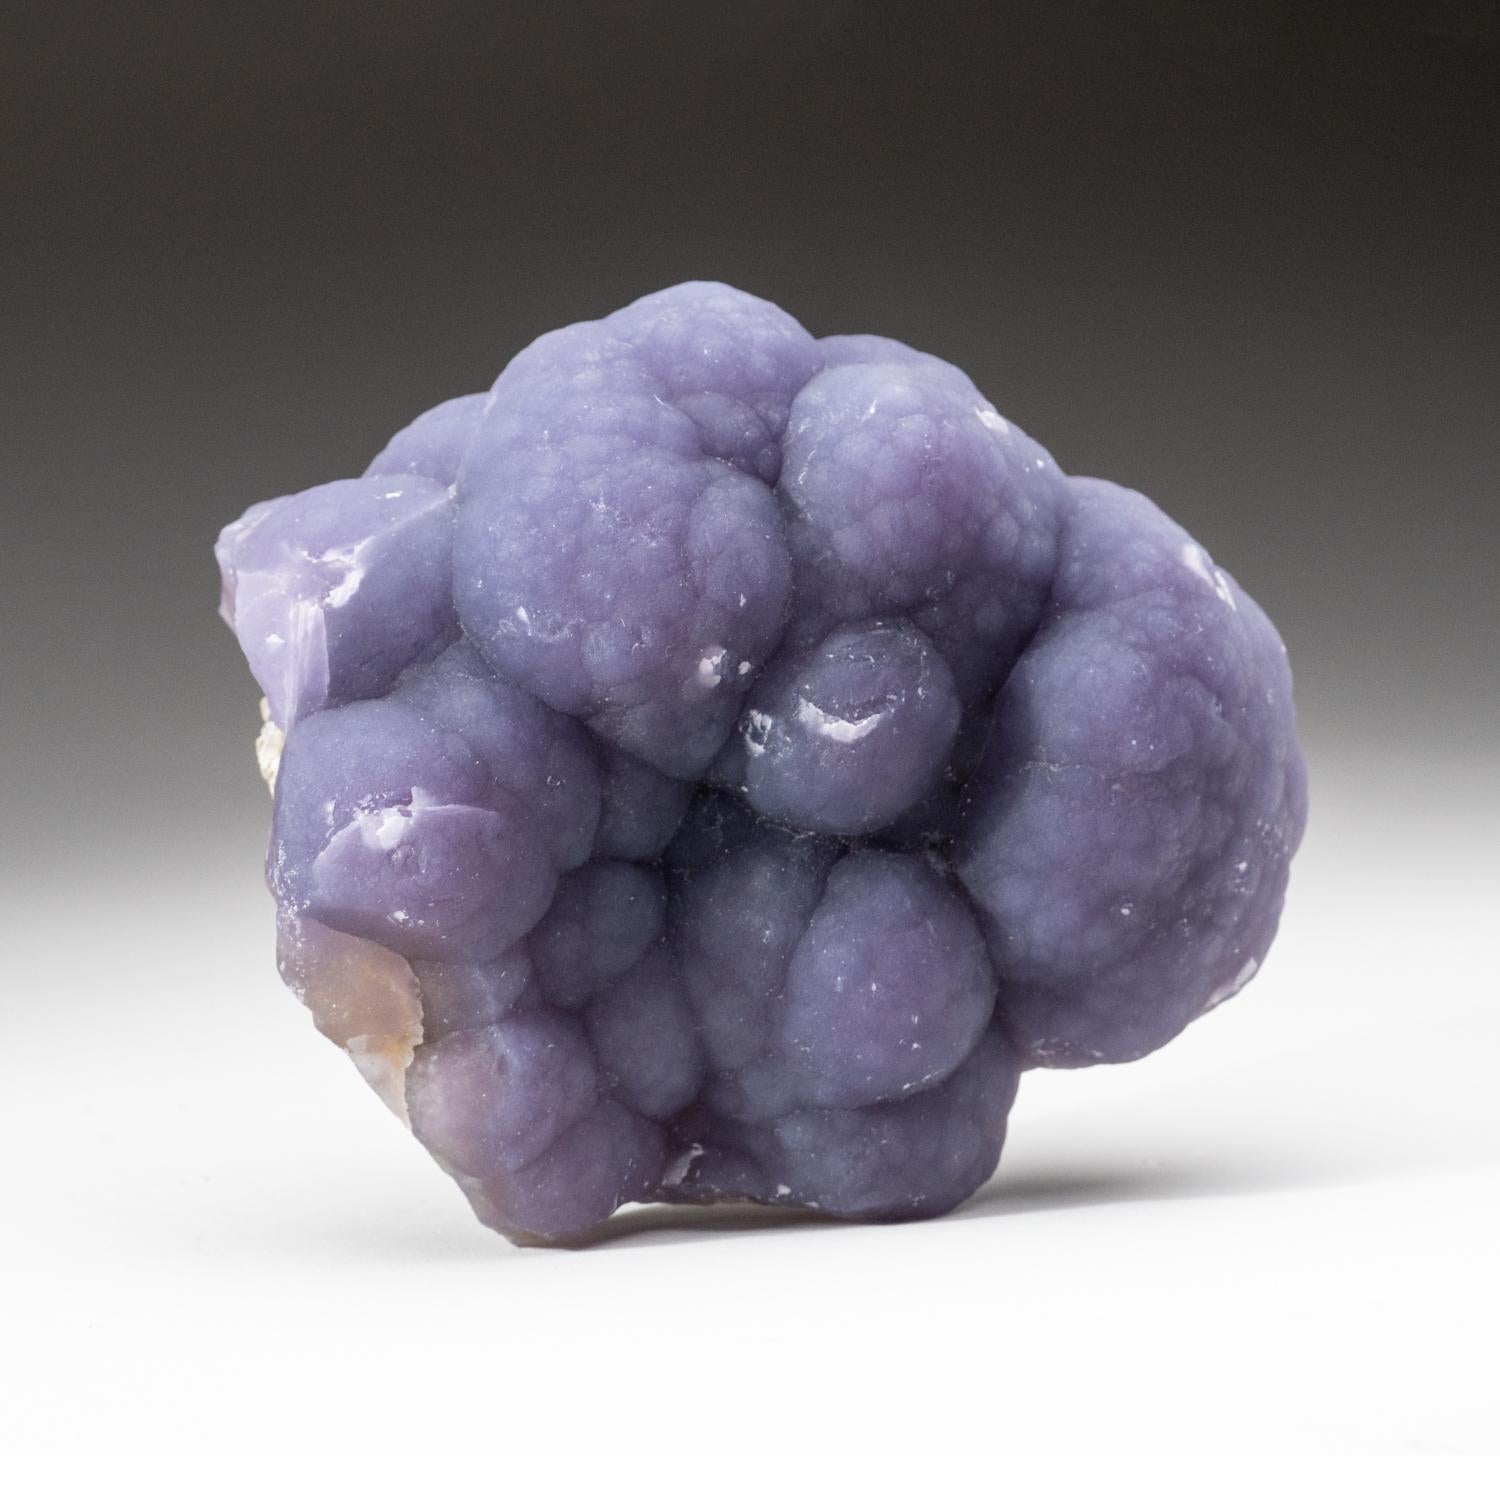 From Minggang Mine, Xinyang Prefecture, Henan, China Translucent purple fluorite in botryoidal formation with sculptural hemispherical aggregates covering both sides of its matrix. This fluorite is unique and attractive, featuring a lustrous sheen